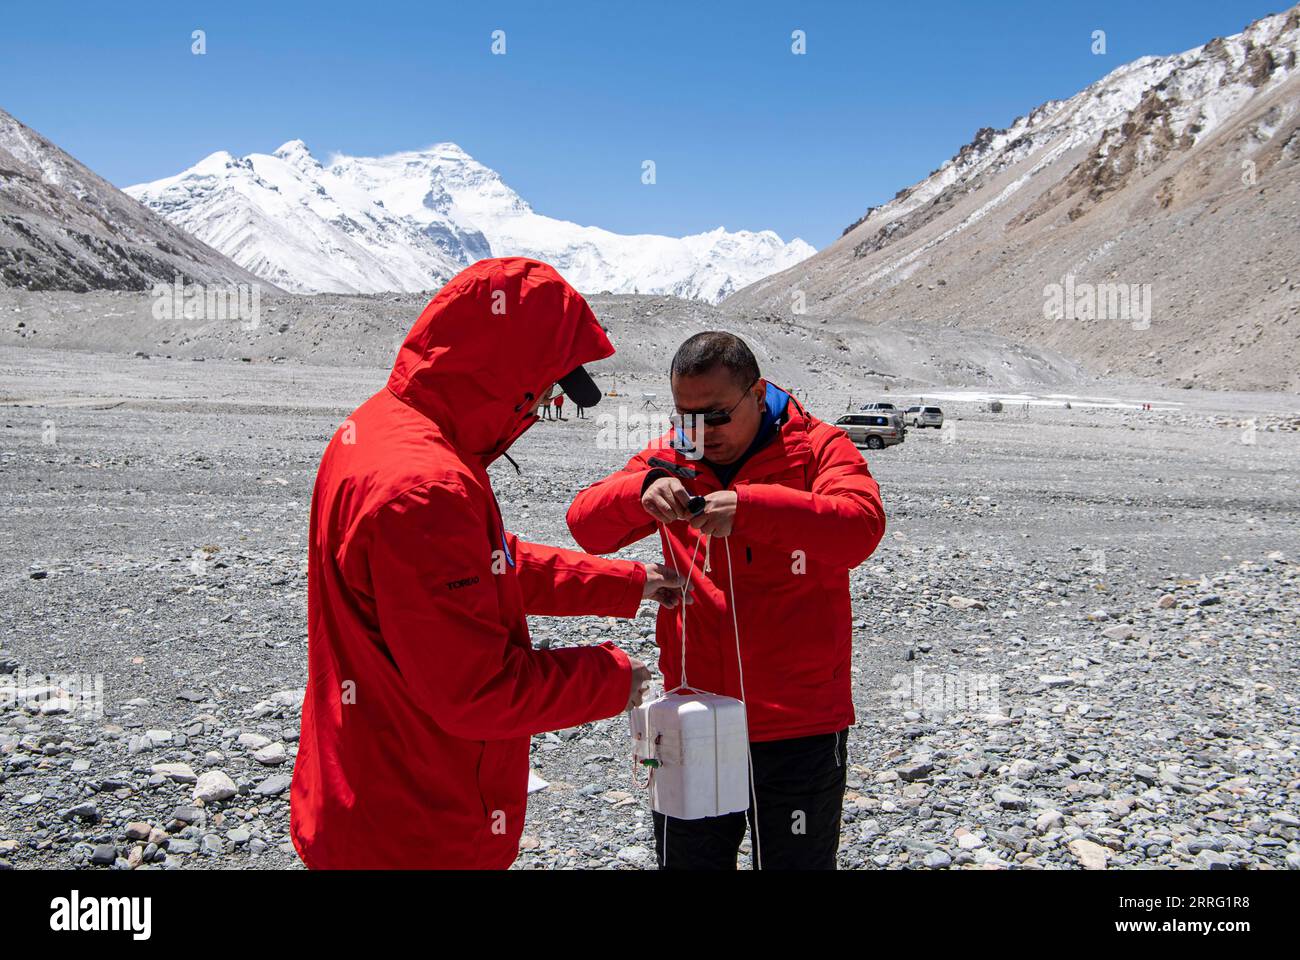 220503 -- MOUNT QOMOLANGMA BASE CAMP, May 3, 2022 -- Scientific research members prepare the radiosonde and ozonesonde to be attached to a weather balloon at the Mount Qomolangma base camp on May 3, 2022. China has started a new comprehensive scientific expedition on Mount Qomolangma, the world s highest peak on the China-Nepal border. Weather factors such as temperature, wind speed and humidity will directly affect the completion of scientific research tasks and the safety of research personnel at high altitude. Therefore, a meteorological support team has been launched in safeguards of the s Stock Photo